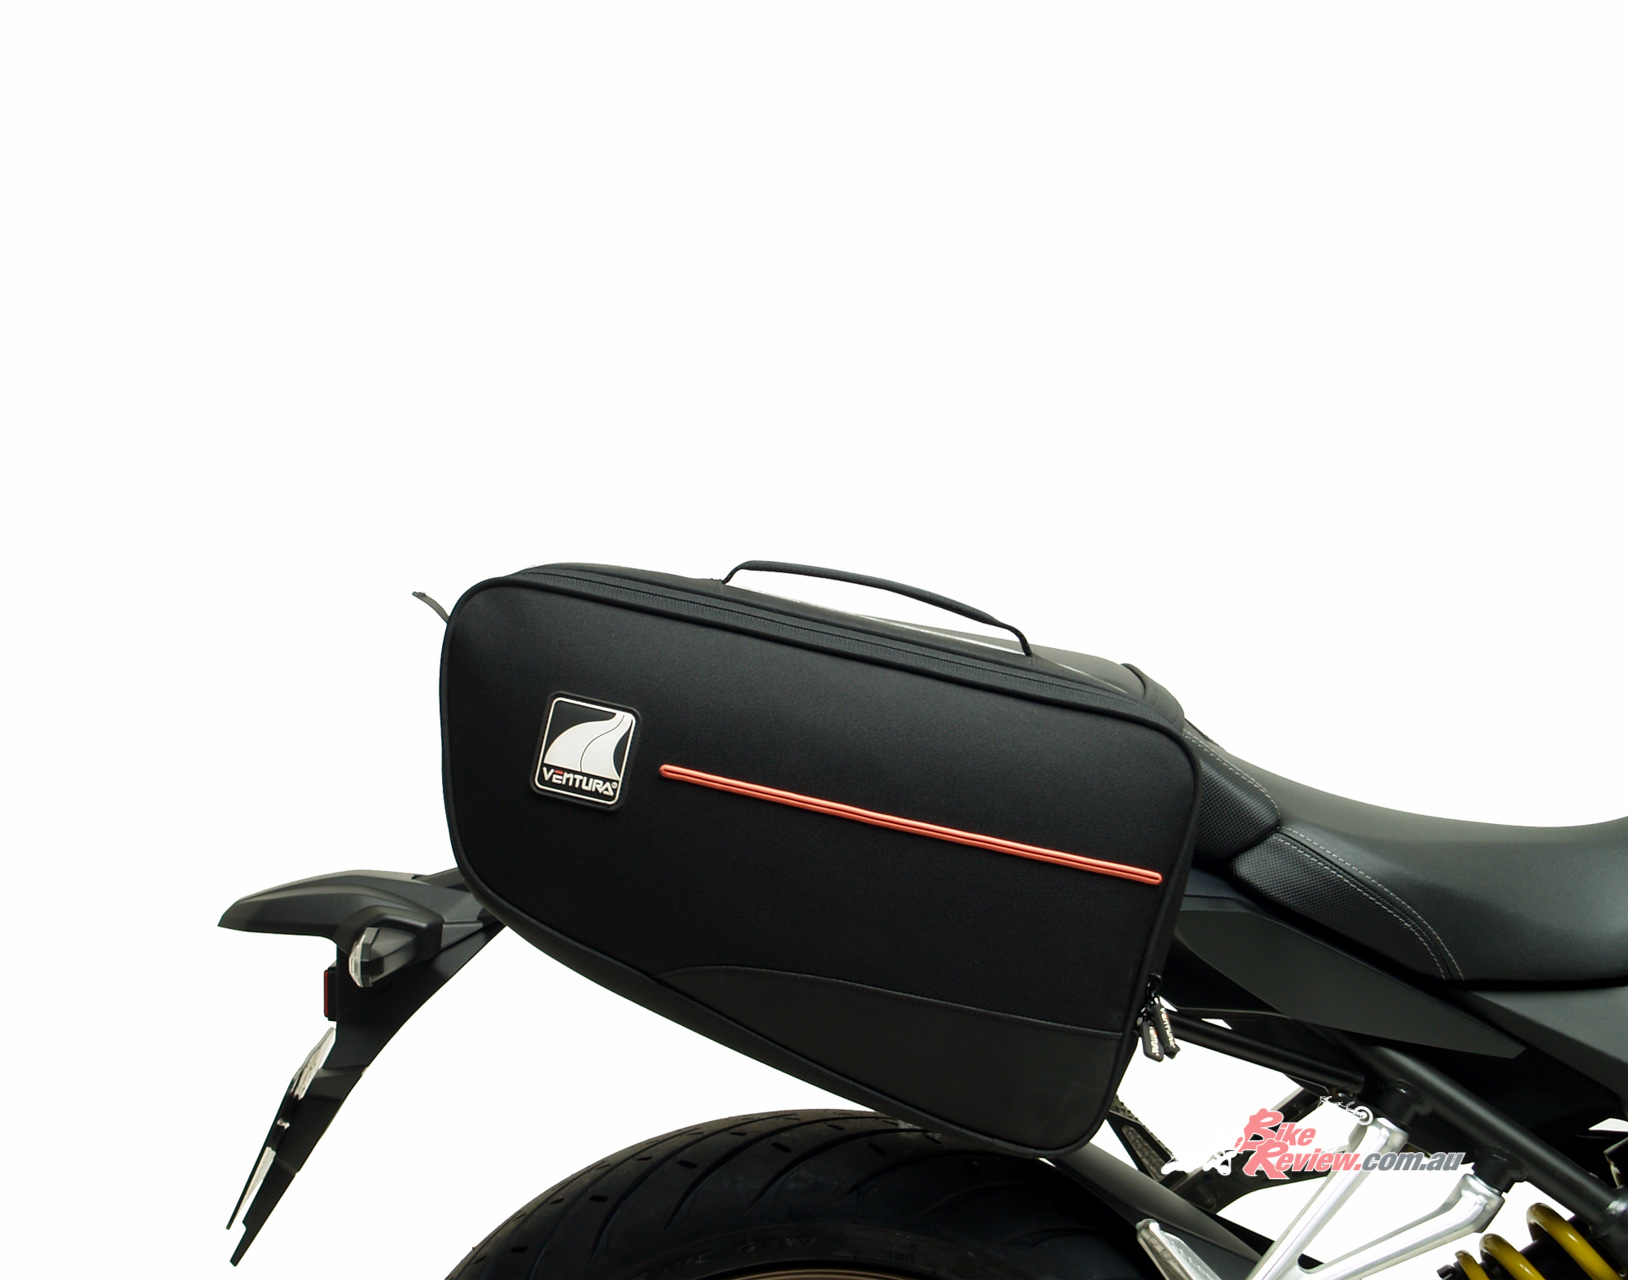 New Product: Ventura Luggage for 2019 CB650R & CBR650R - Bike Review